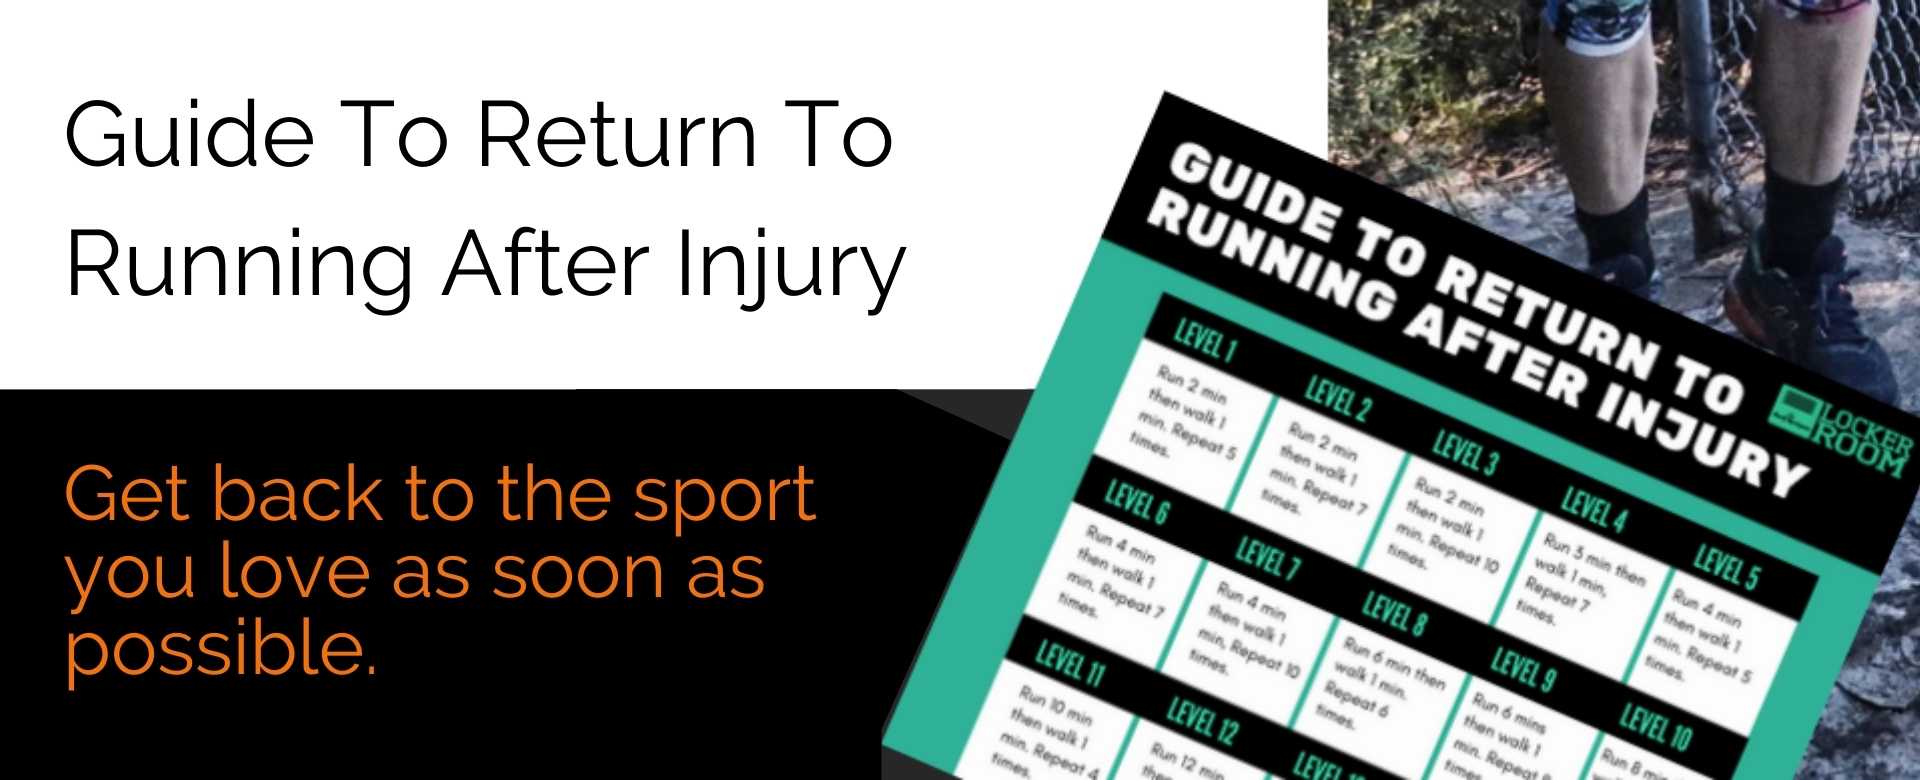 A Step-By-Step Plan To Injury Recovery